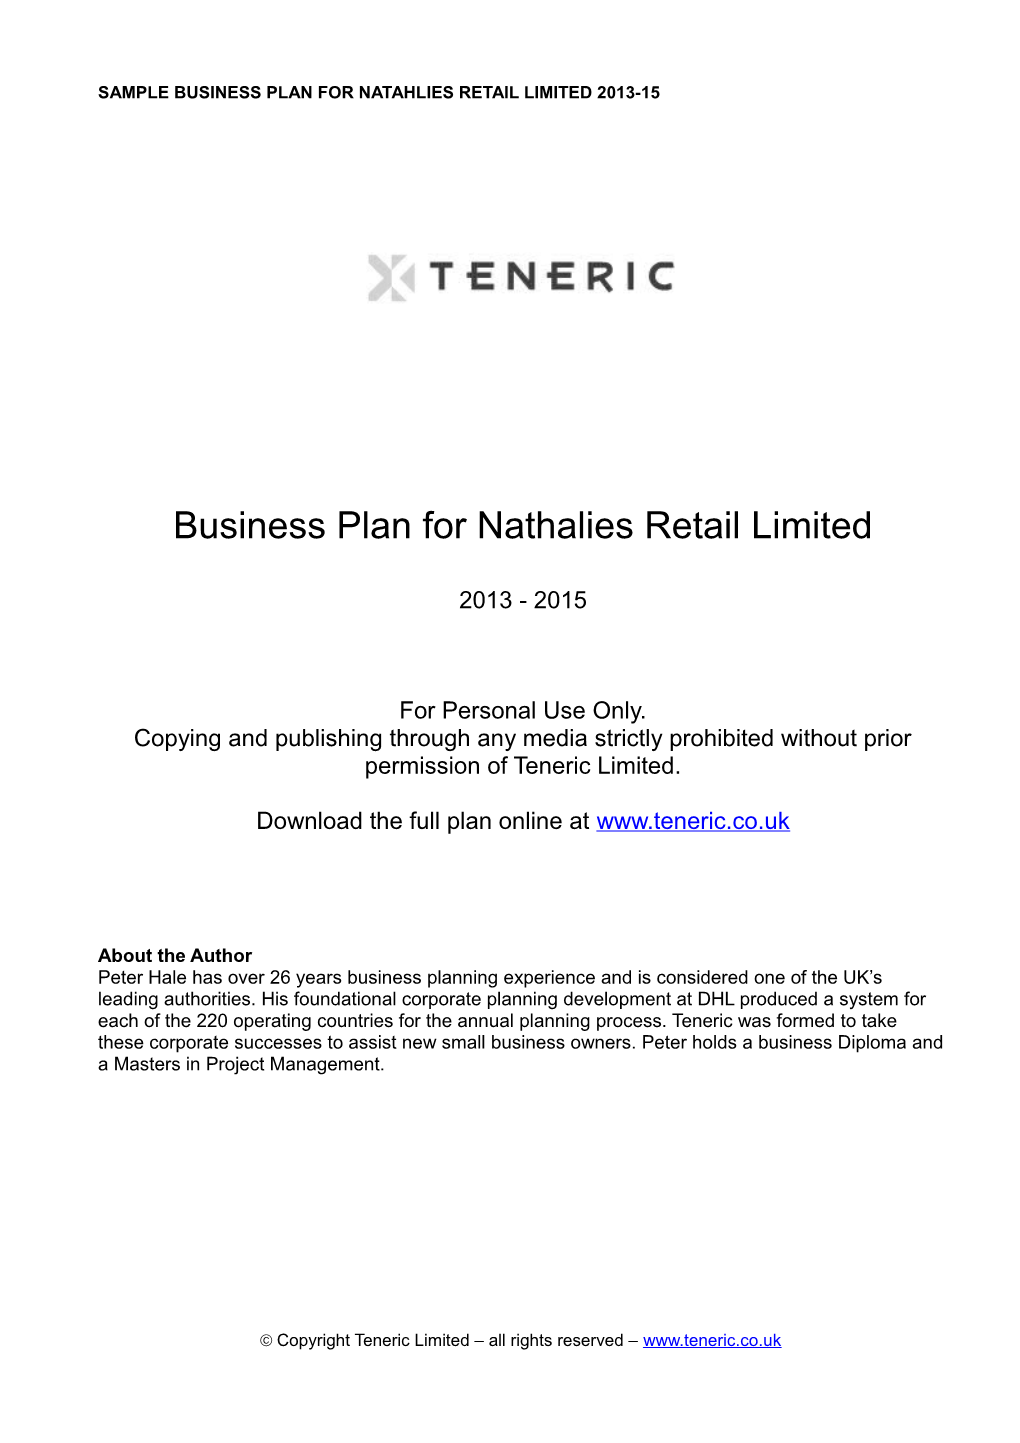 Sample Business Plan for Natahlies Retail Limited 2013-15